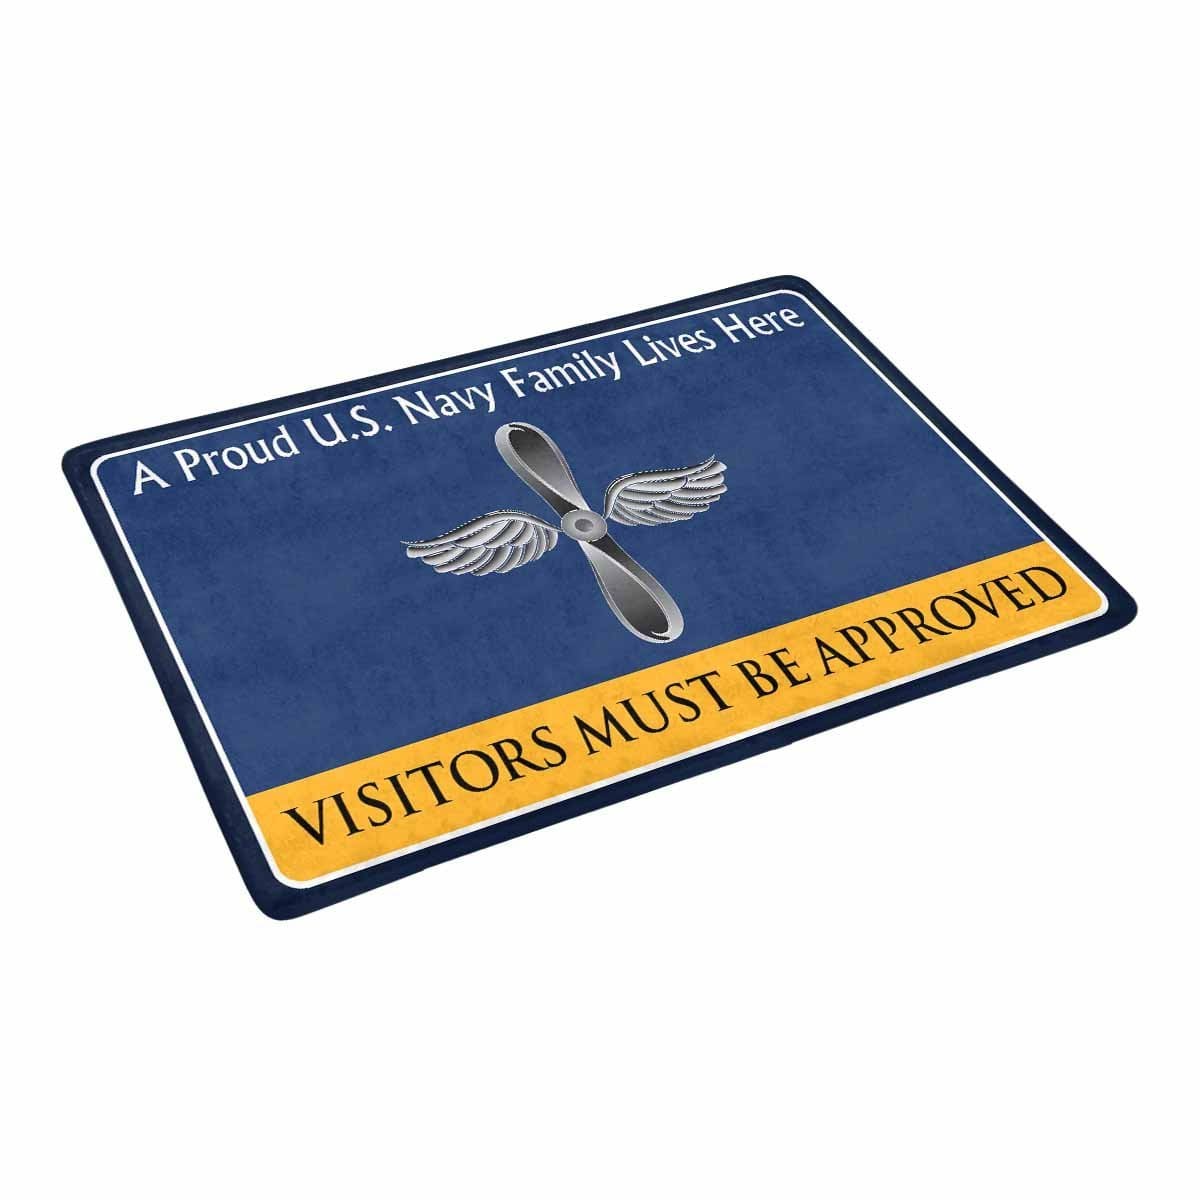 U.S Navy Aviation machinist's mate Navy AD Family Doormat - Visitors must be approved (23,6 inches x 15,7 inches)-Doormat-Navy-Rate-Veterans Nation